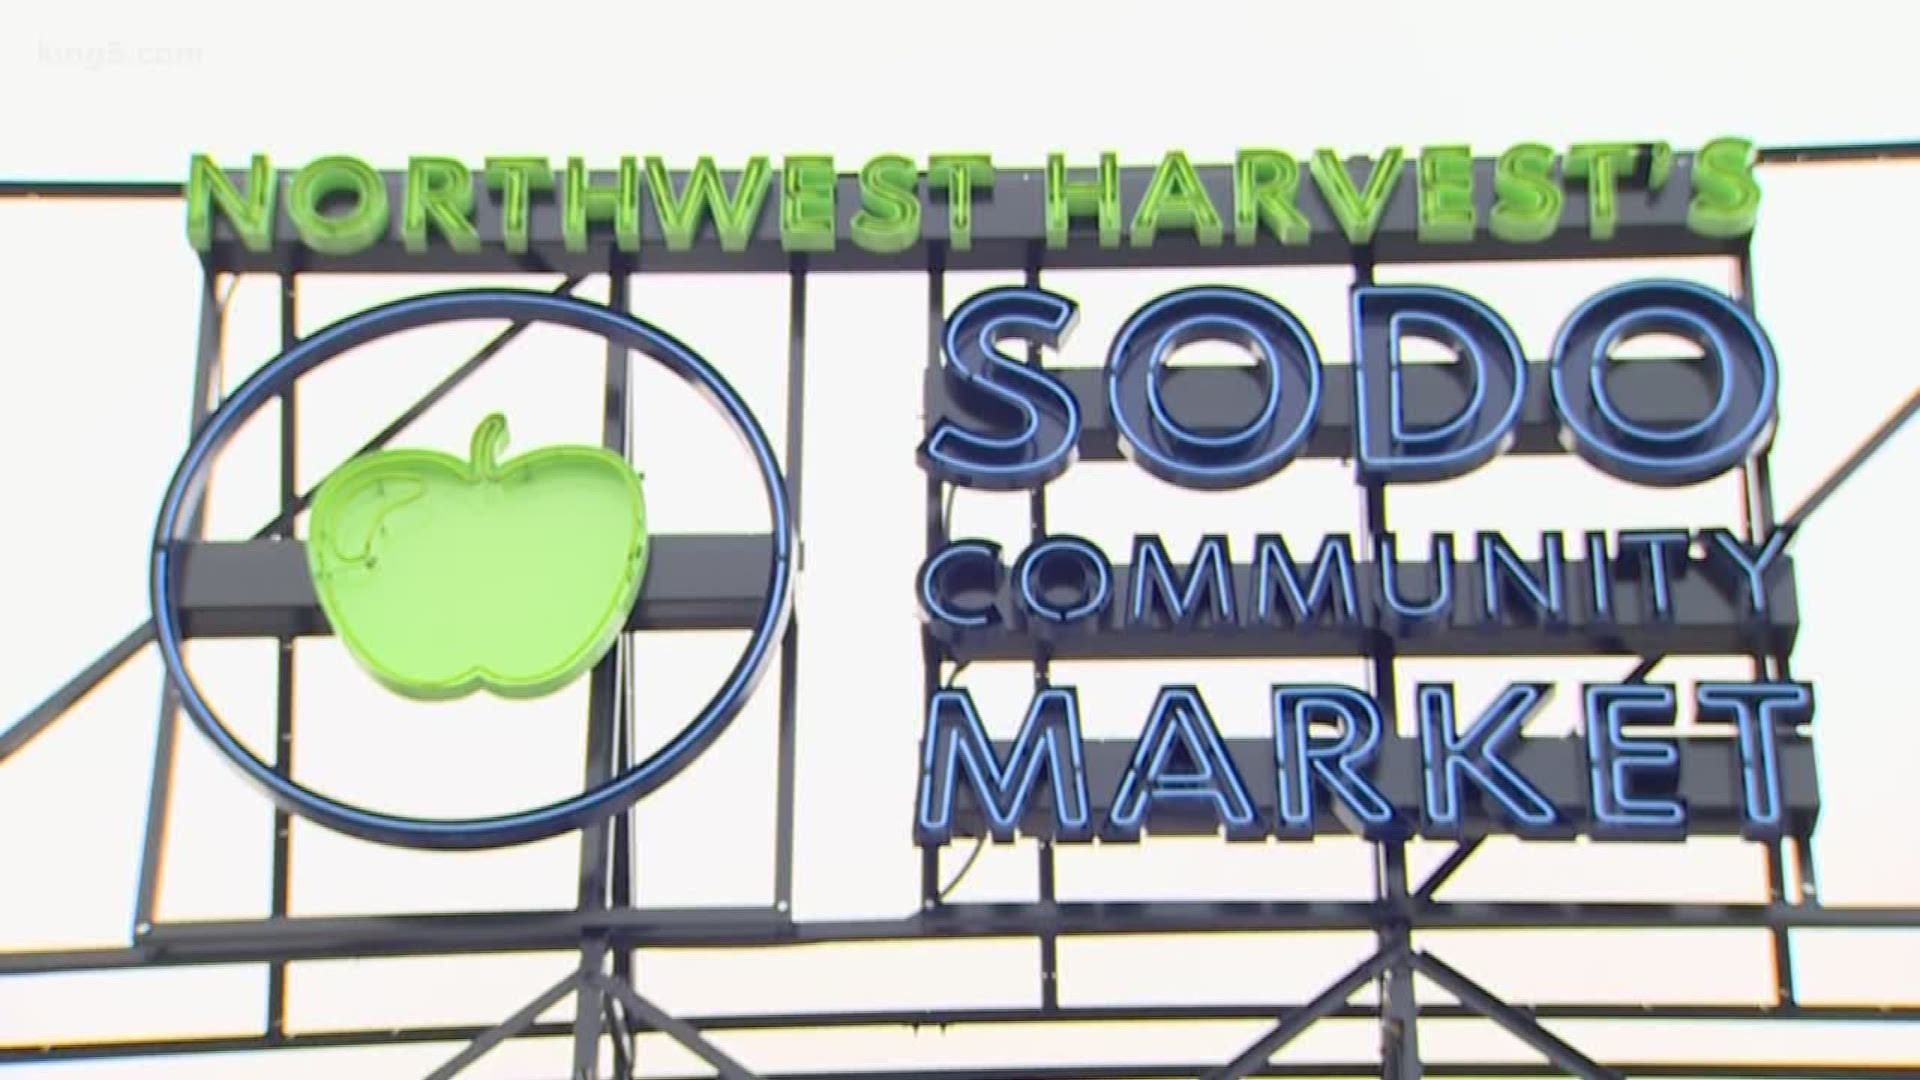 Northwest Harvest's SODO Community Market assists some of the estimated 40 million individuals nationwide who are food insecure.